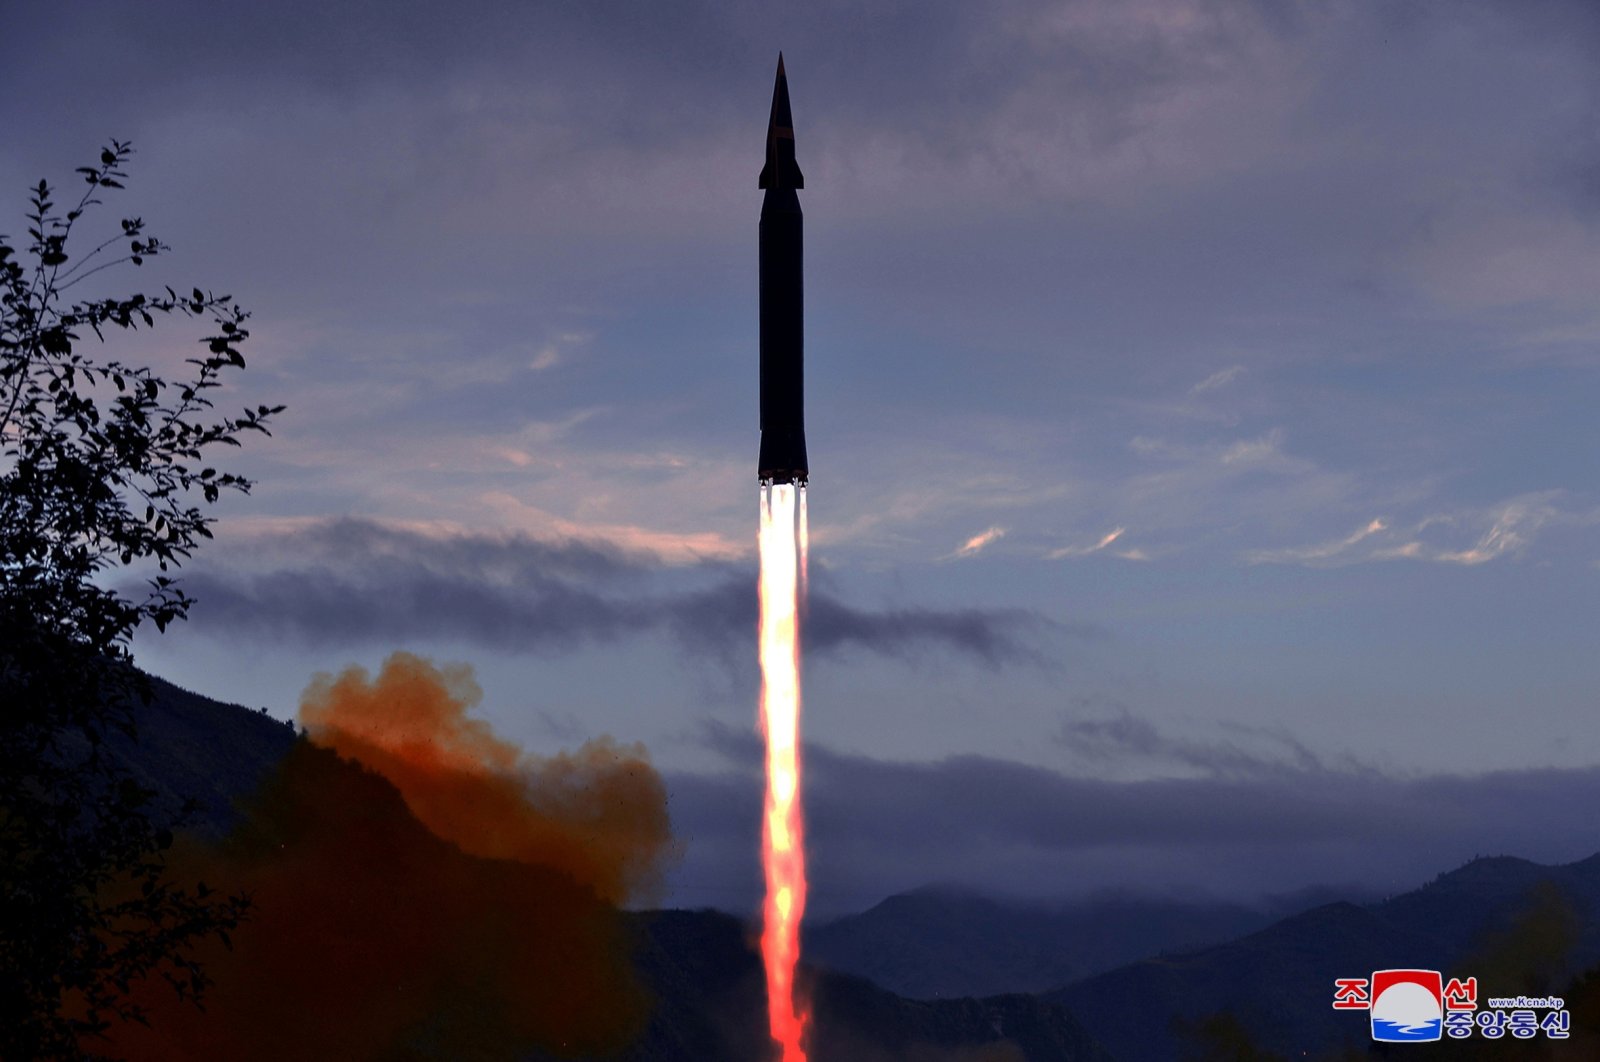 The newly developed hypersonic missile Hwasong-8 is test-fired by the Academy of Defence Science of the DPRK in Toyang-ri, Ryongrim County of Jagang Province, North Korea, in this undated photo released Sept. 29, 2021 by North Korea's Korean Central News Agency (KCNA). (KCNA via Reuters)